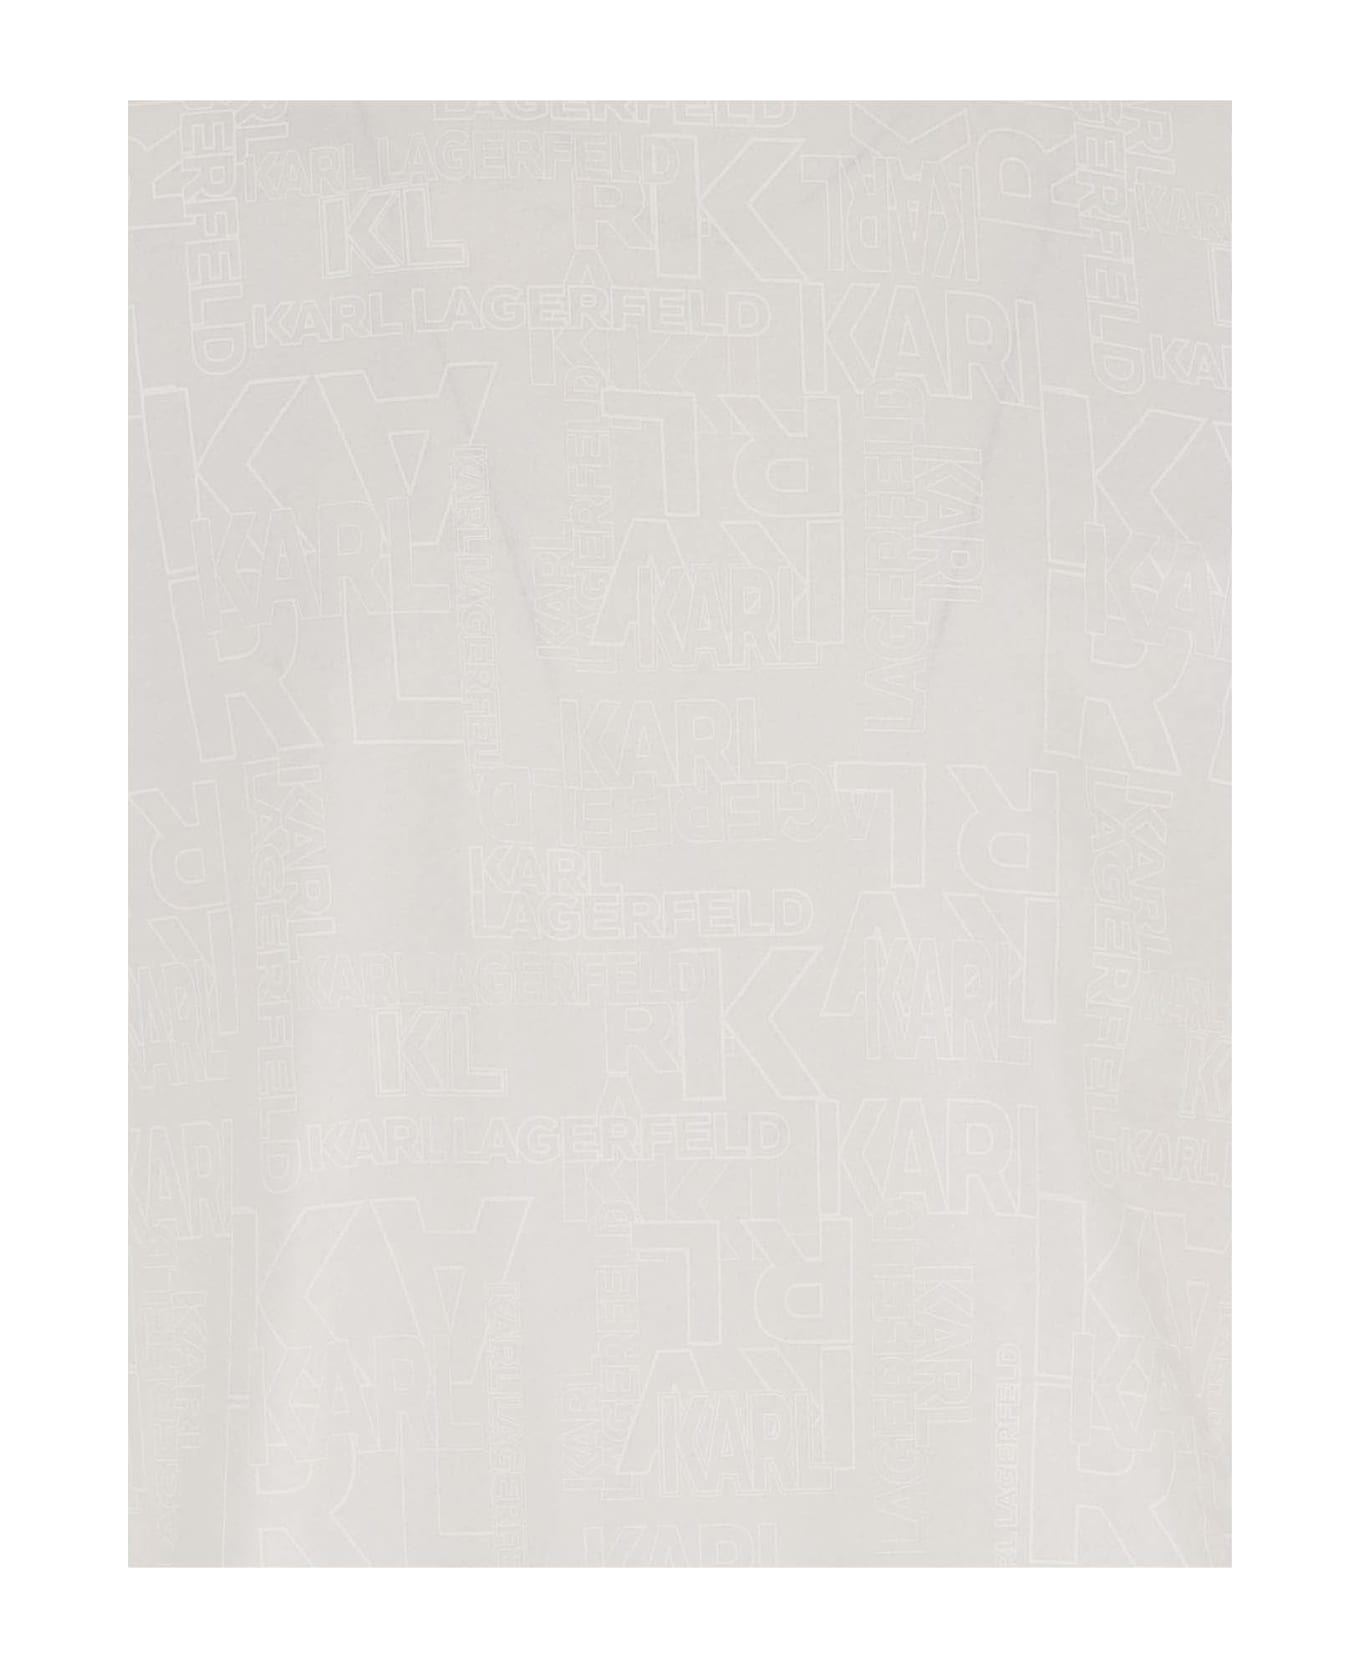 Karl Lagerfeld Cotton T-shirt With All-over Logo - White シャツ